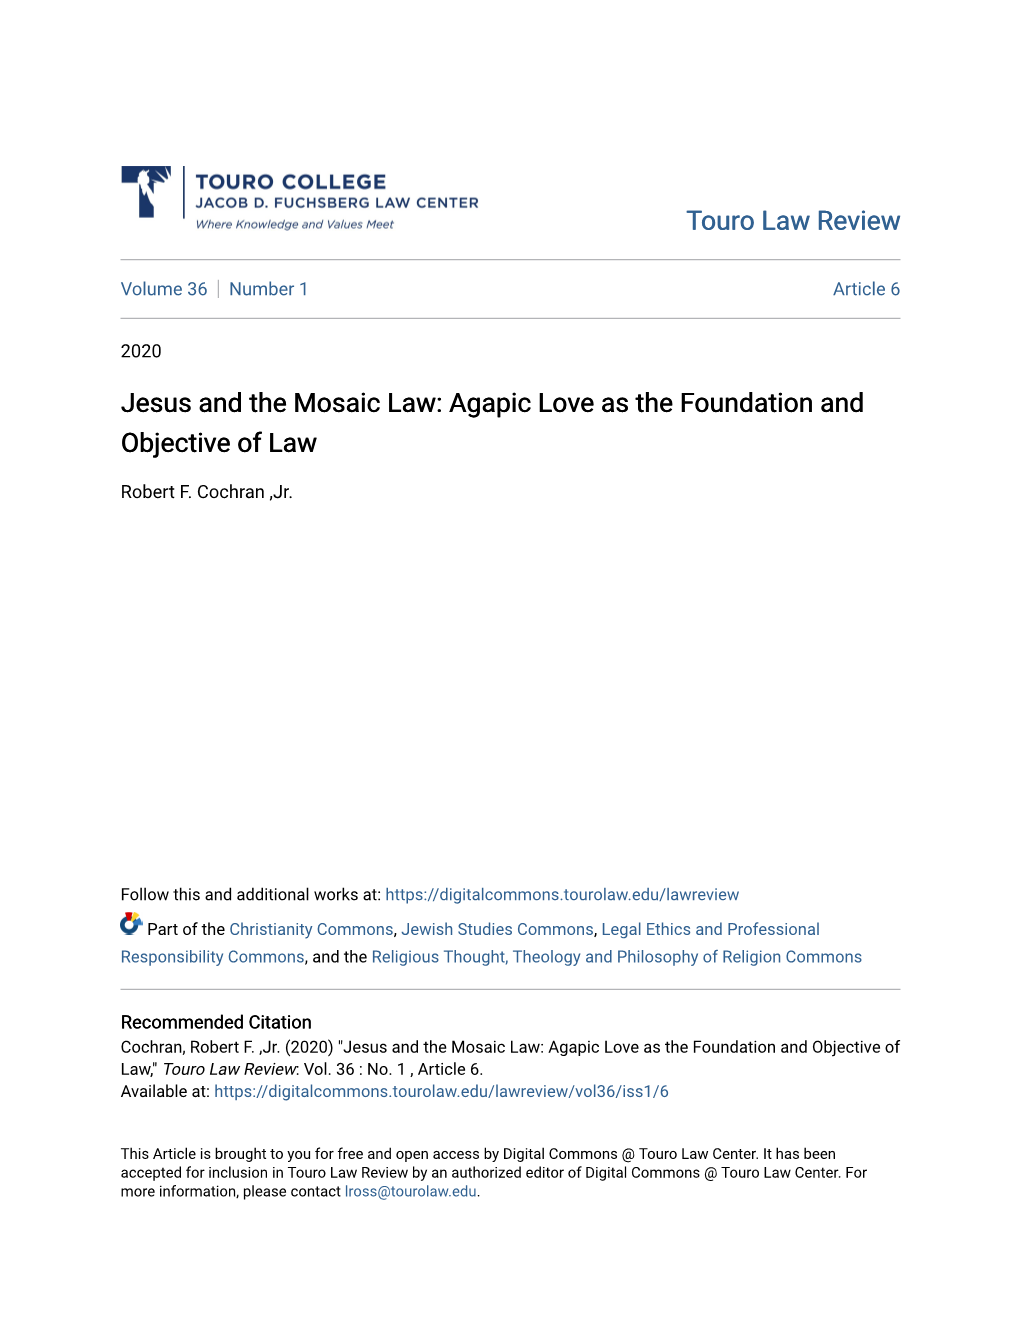 Jesus and the Mosaic Law: Agapic Love As the Foundation and Objective of Law